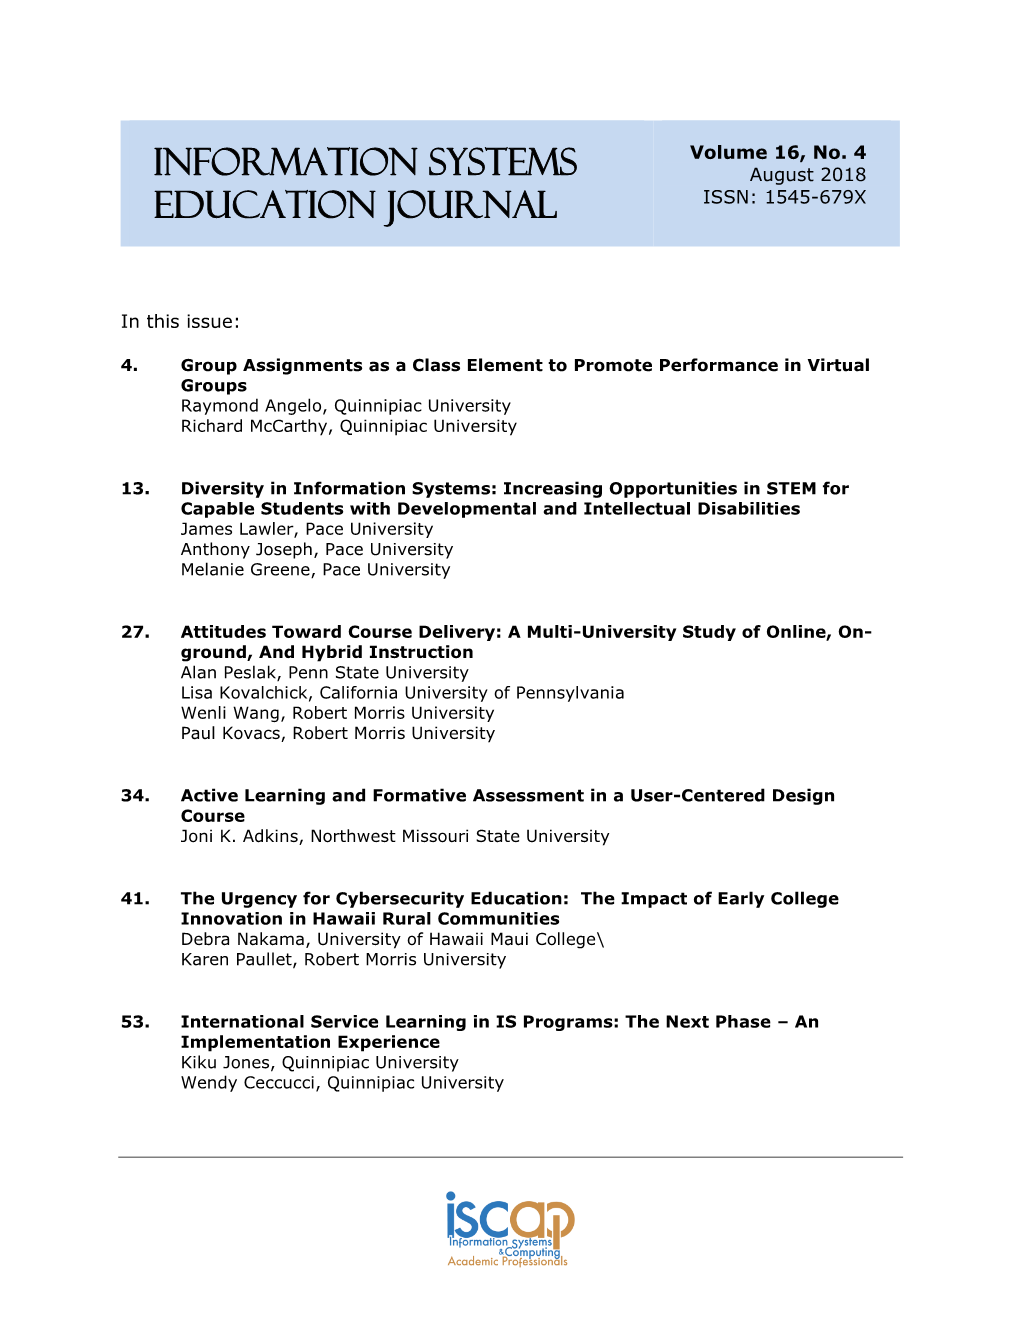 Information Systems Education Journal (ISEDJ) 16 (4) ISSN: 1545-679X August 2018 ______